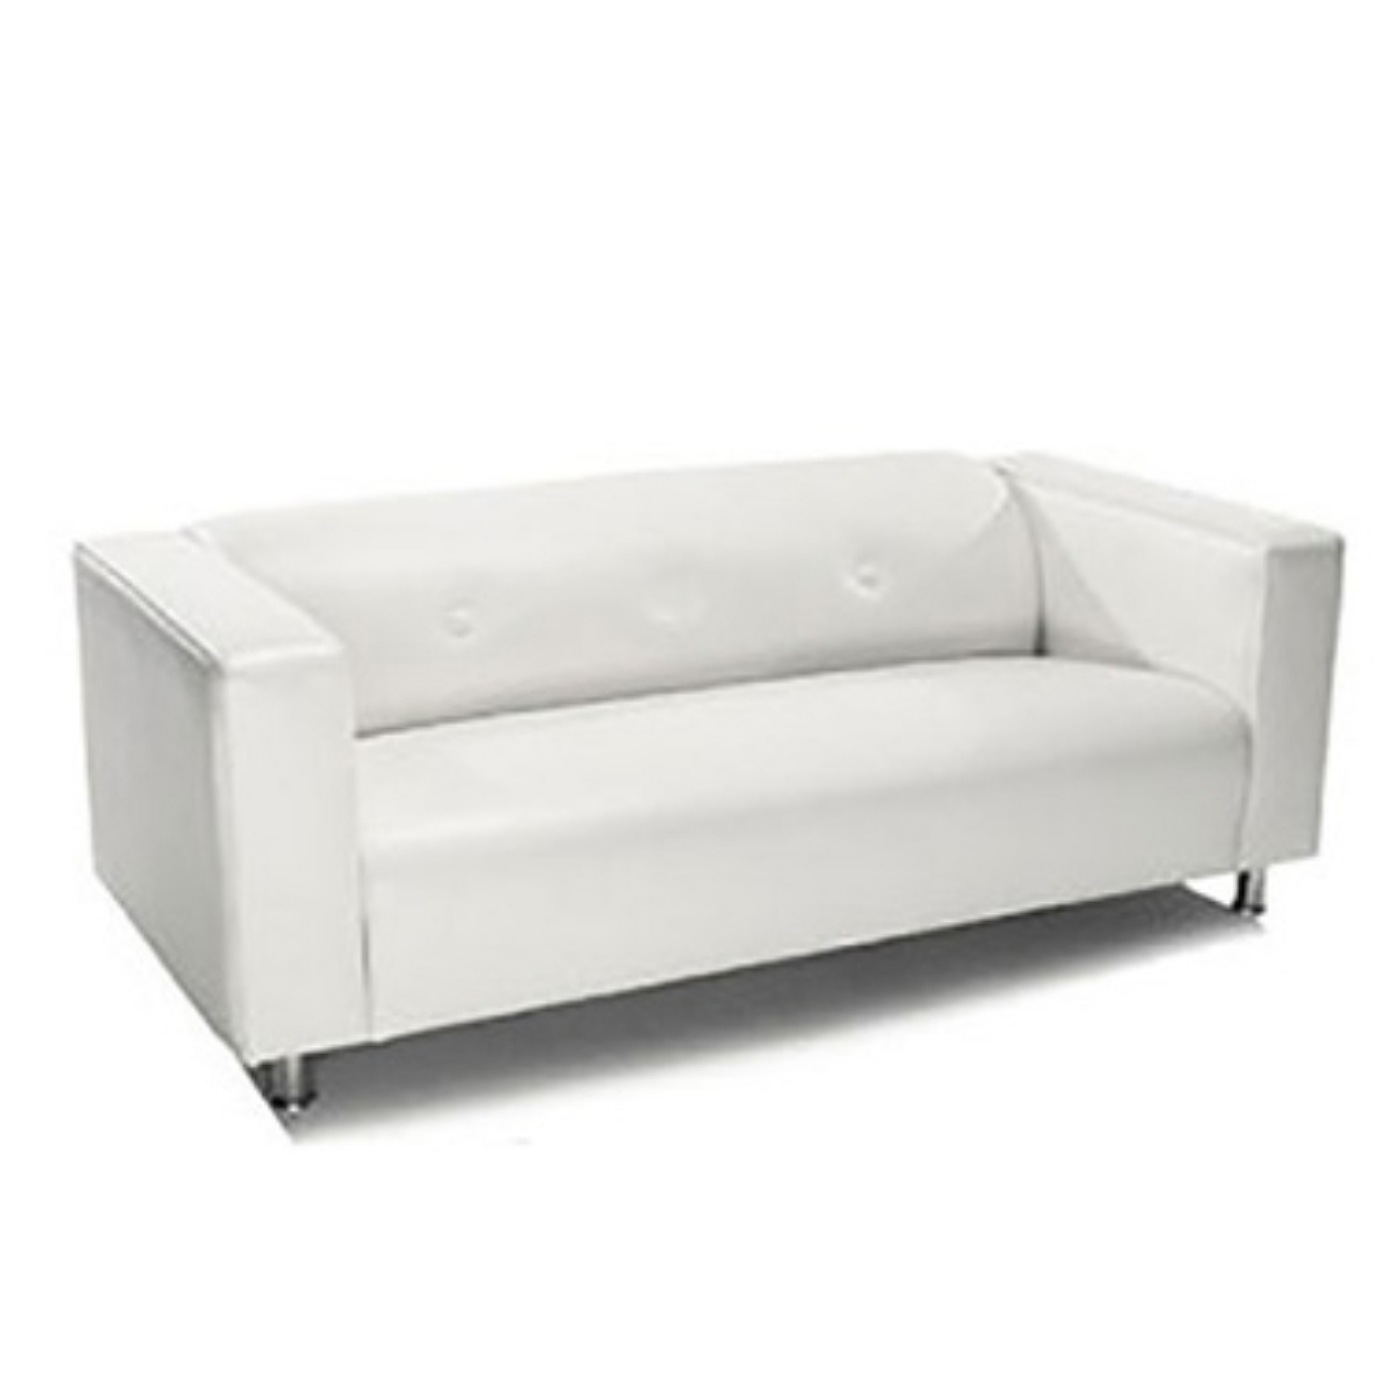 White Leather Double Seat Couch With Silver Legs For Hire.